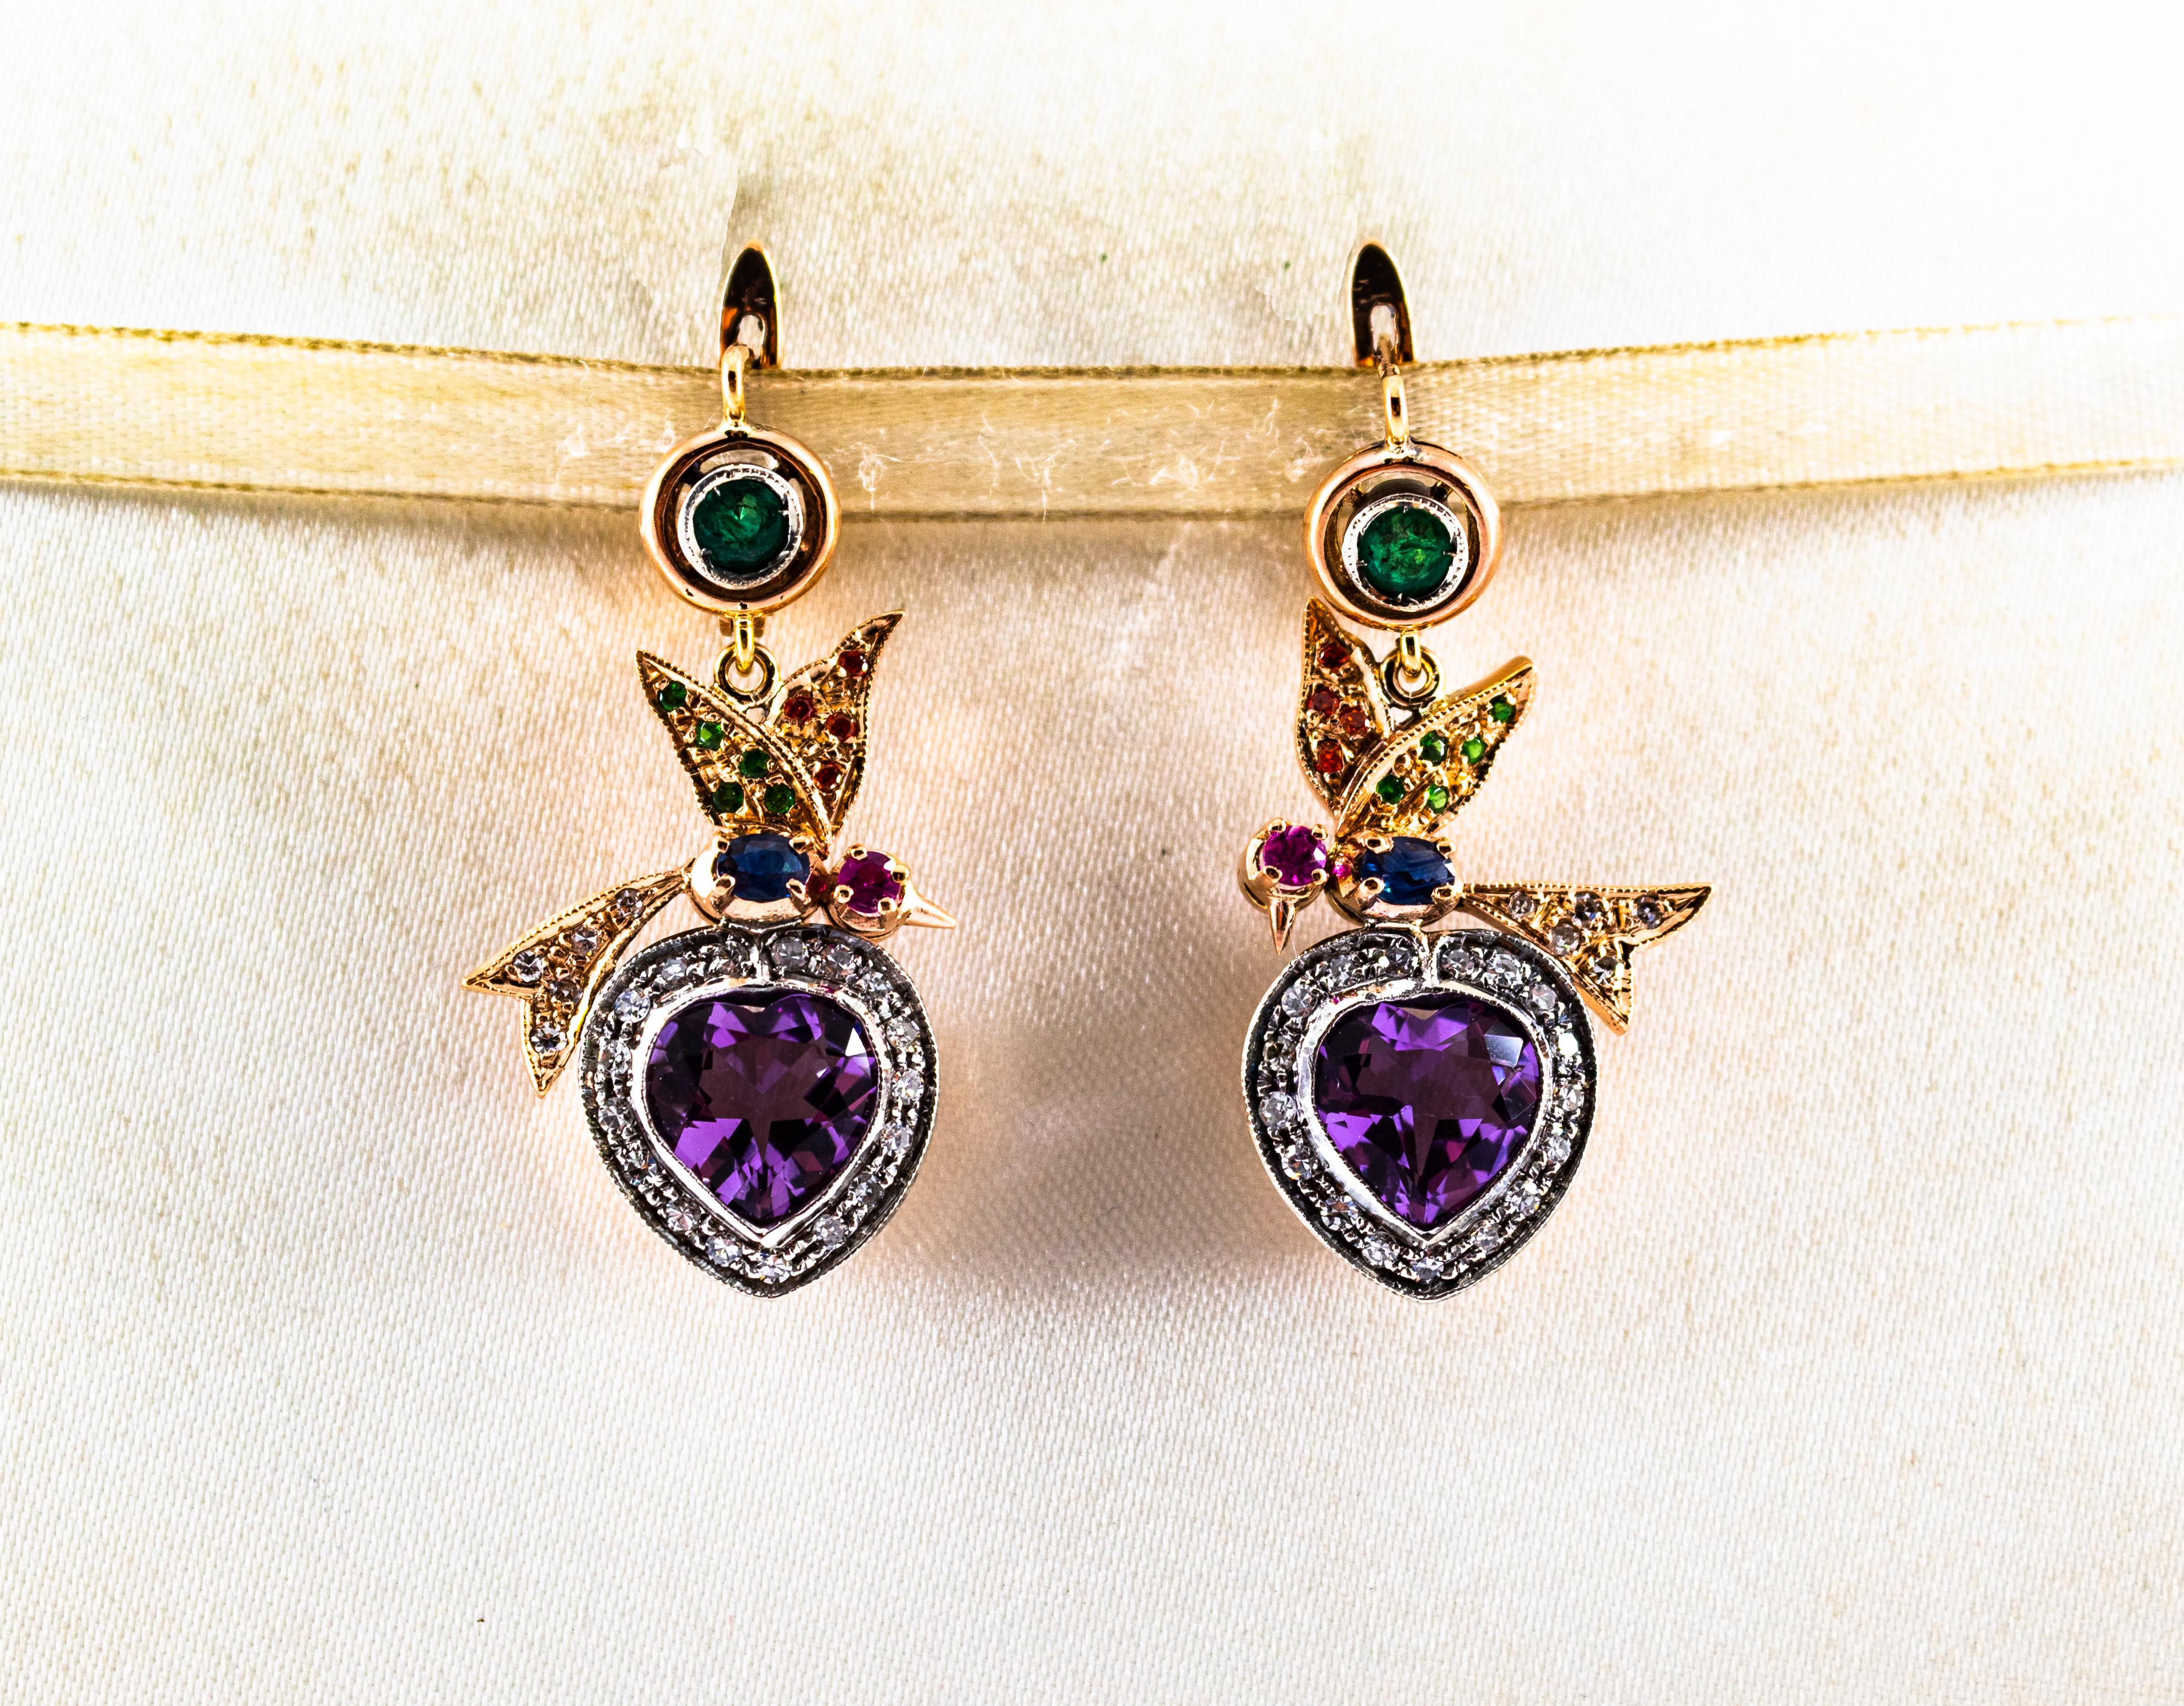 These Lever-Back Earrings are made of 9K Yellow Gold and Sterling Silver.
These Earrings have 0.55 Carats of White Diamonds.
These Earrings have 0.40 Carat of Emeralds.
These Earrings have 0.20 Carat of Rubies.
These Earrings have 0.30 Carat of Blue